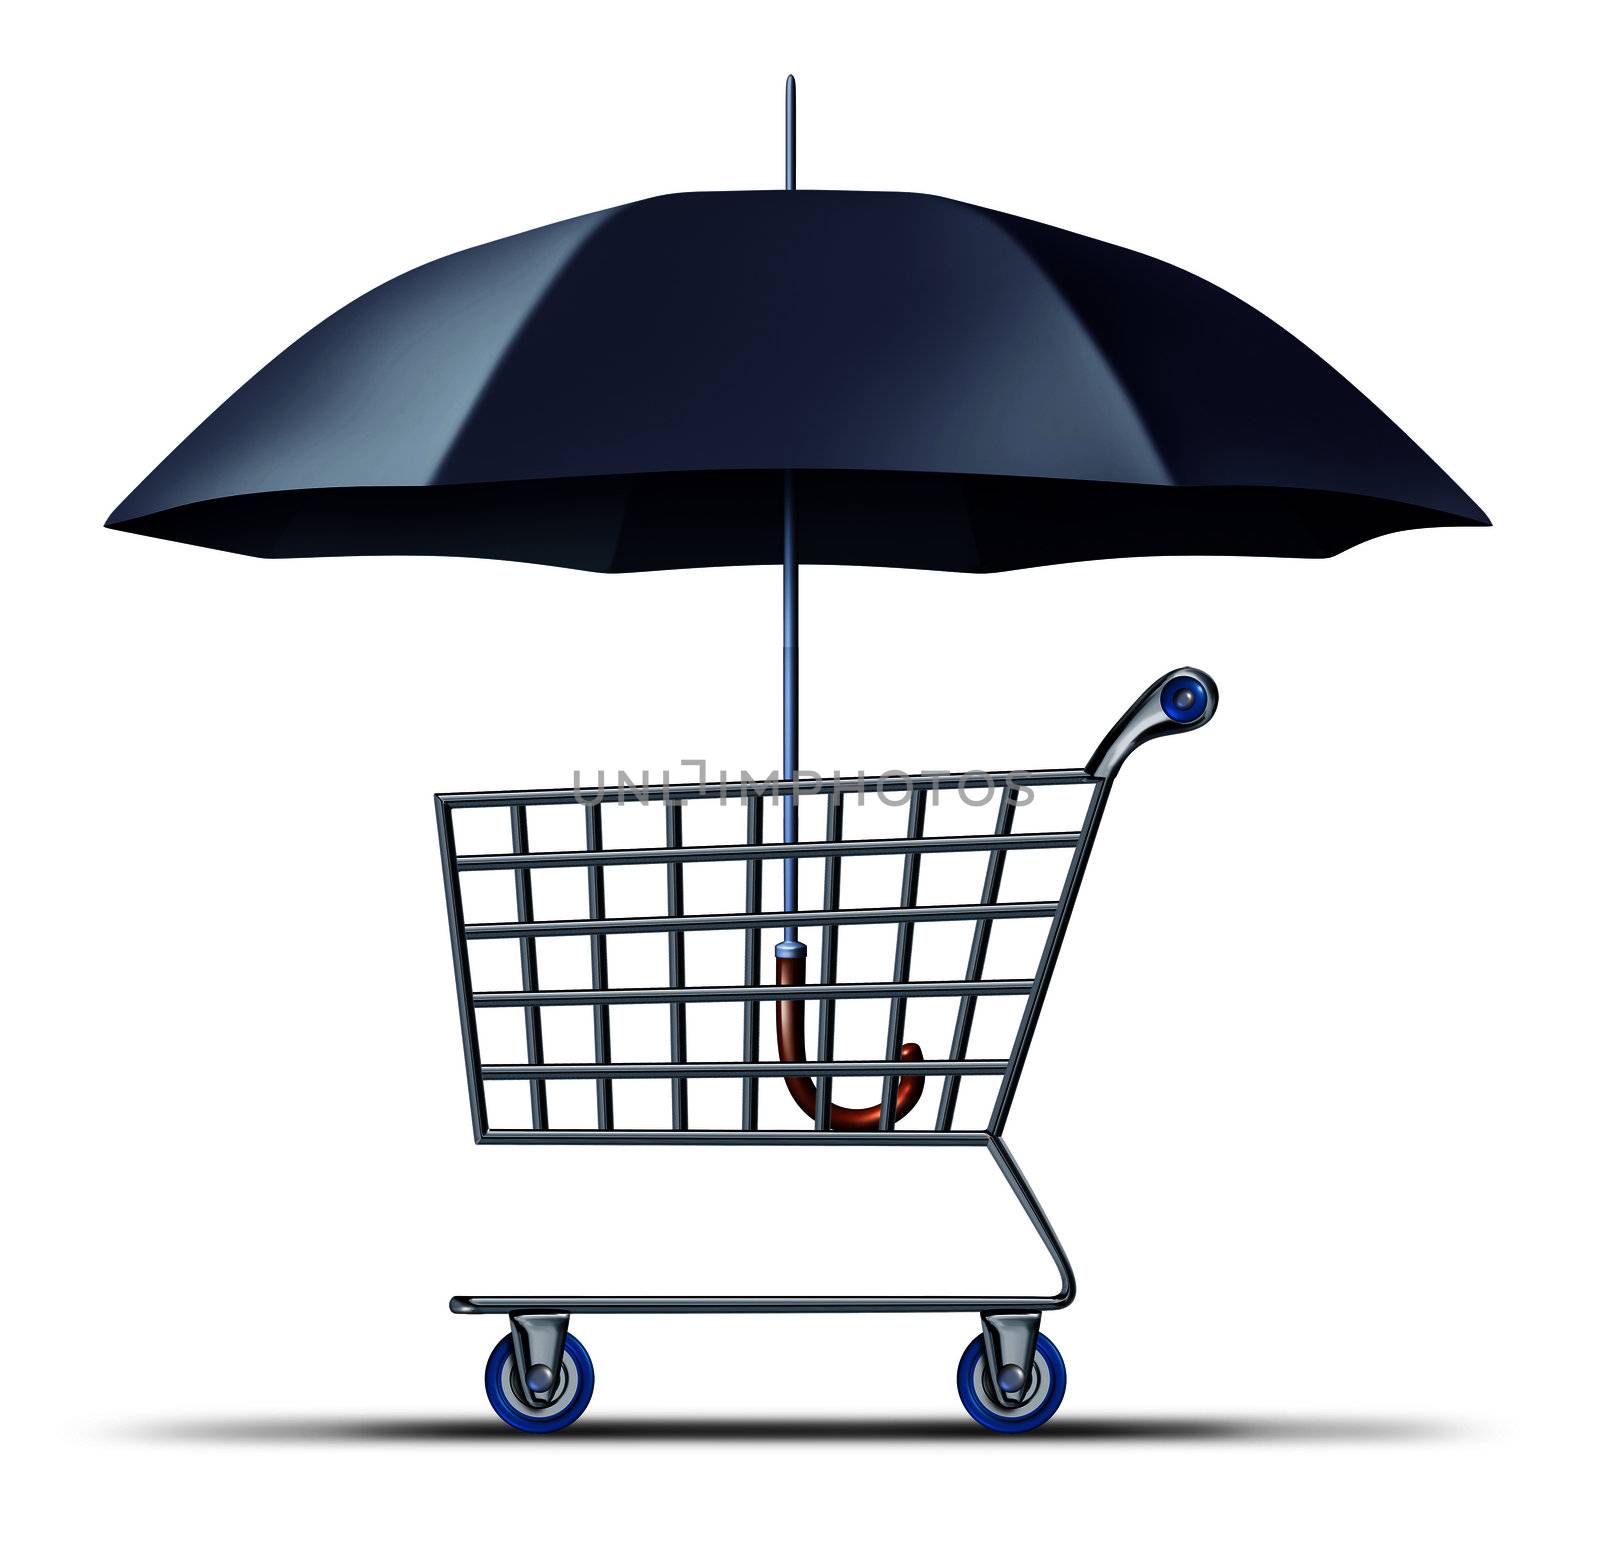 Consumer security and protection with a shopping cart being protected and shielded by an umbrella as a business concept for buyer and credit  card safety  or manufacturers guarantee.